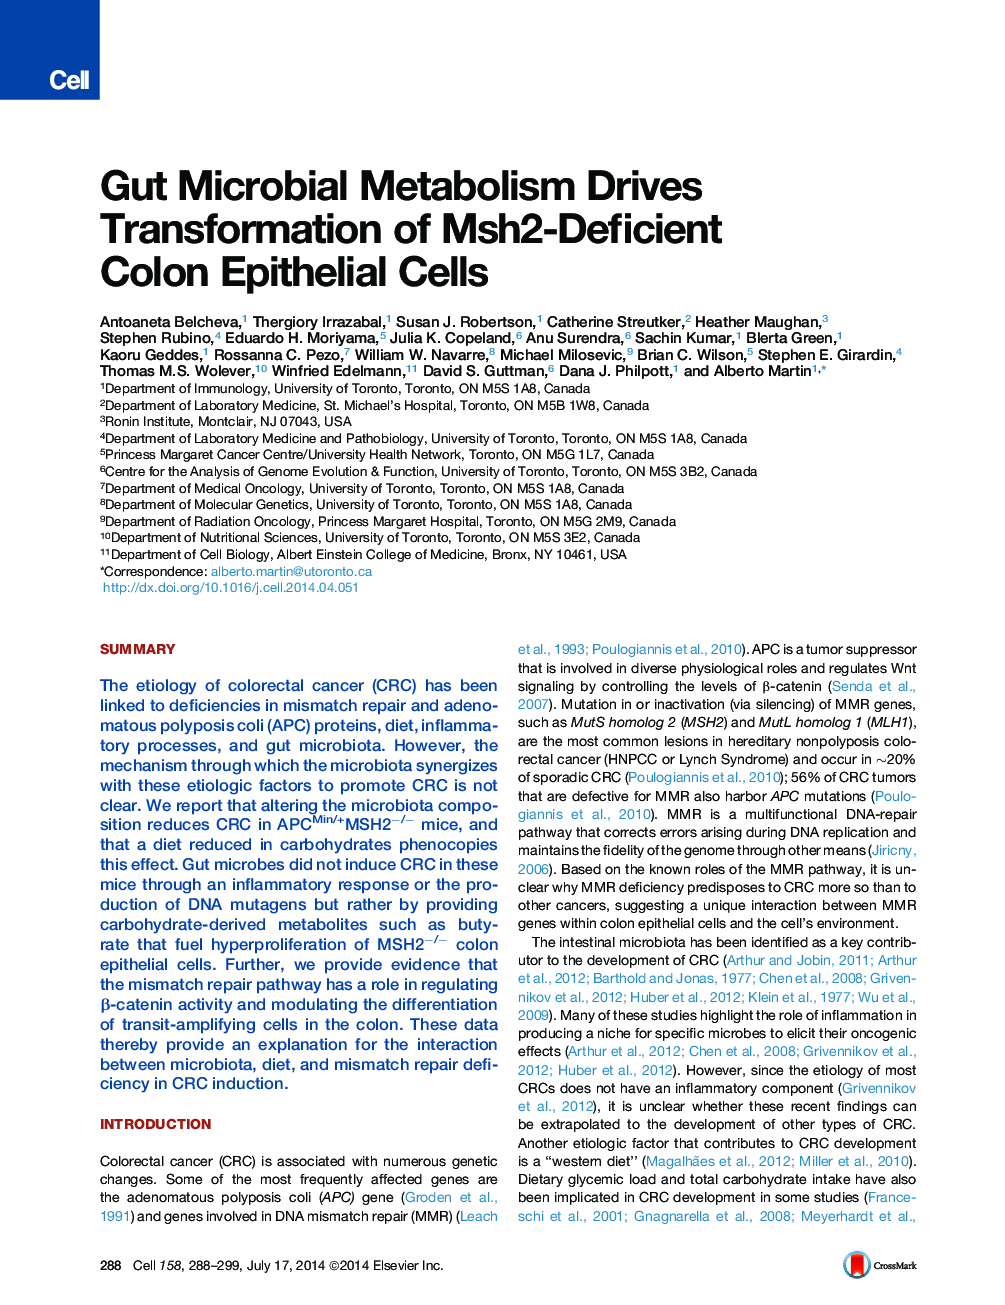 Gut Microbial Metabolism Drives Transformation of Msh2-Deficient Colon Epithelial Cells